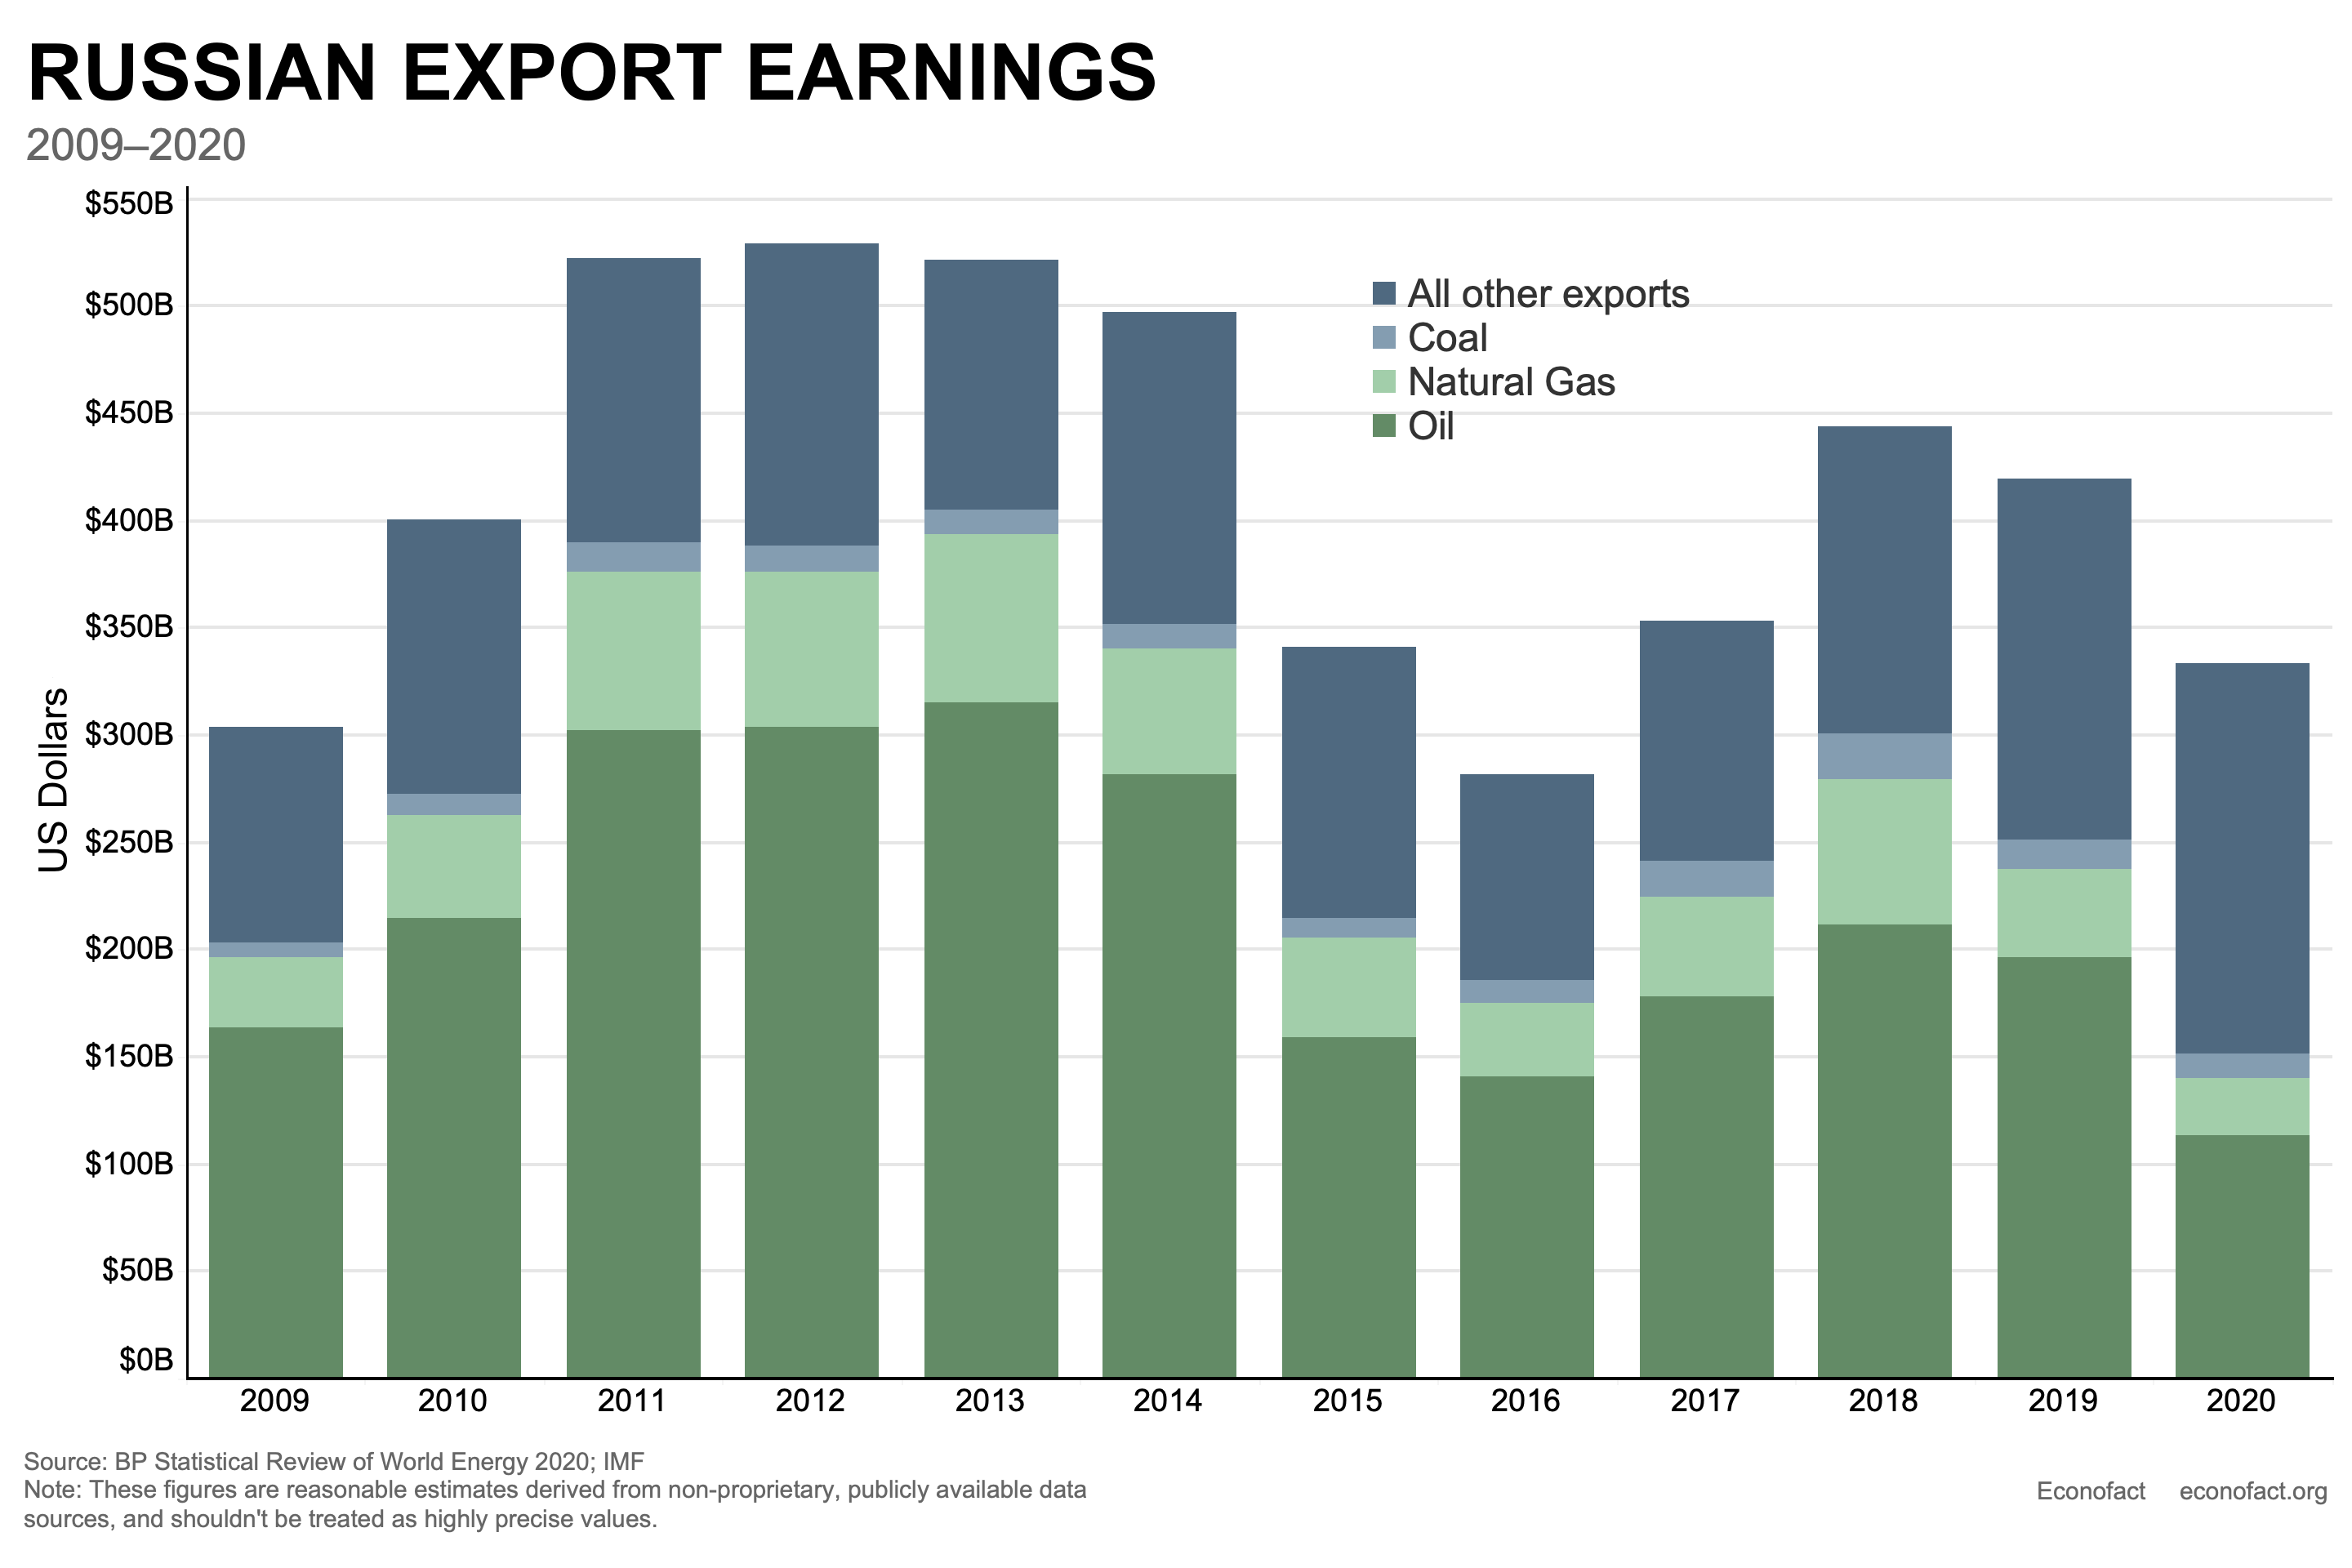 Russian Export Earnings from 2009 to 2020.